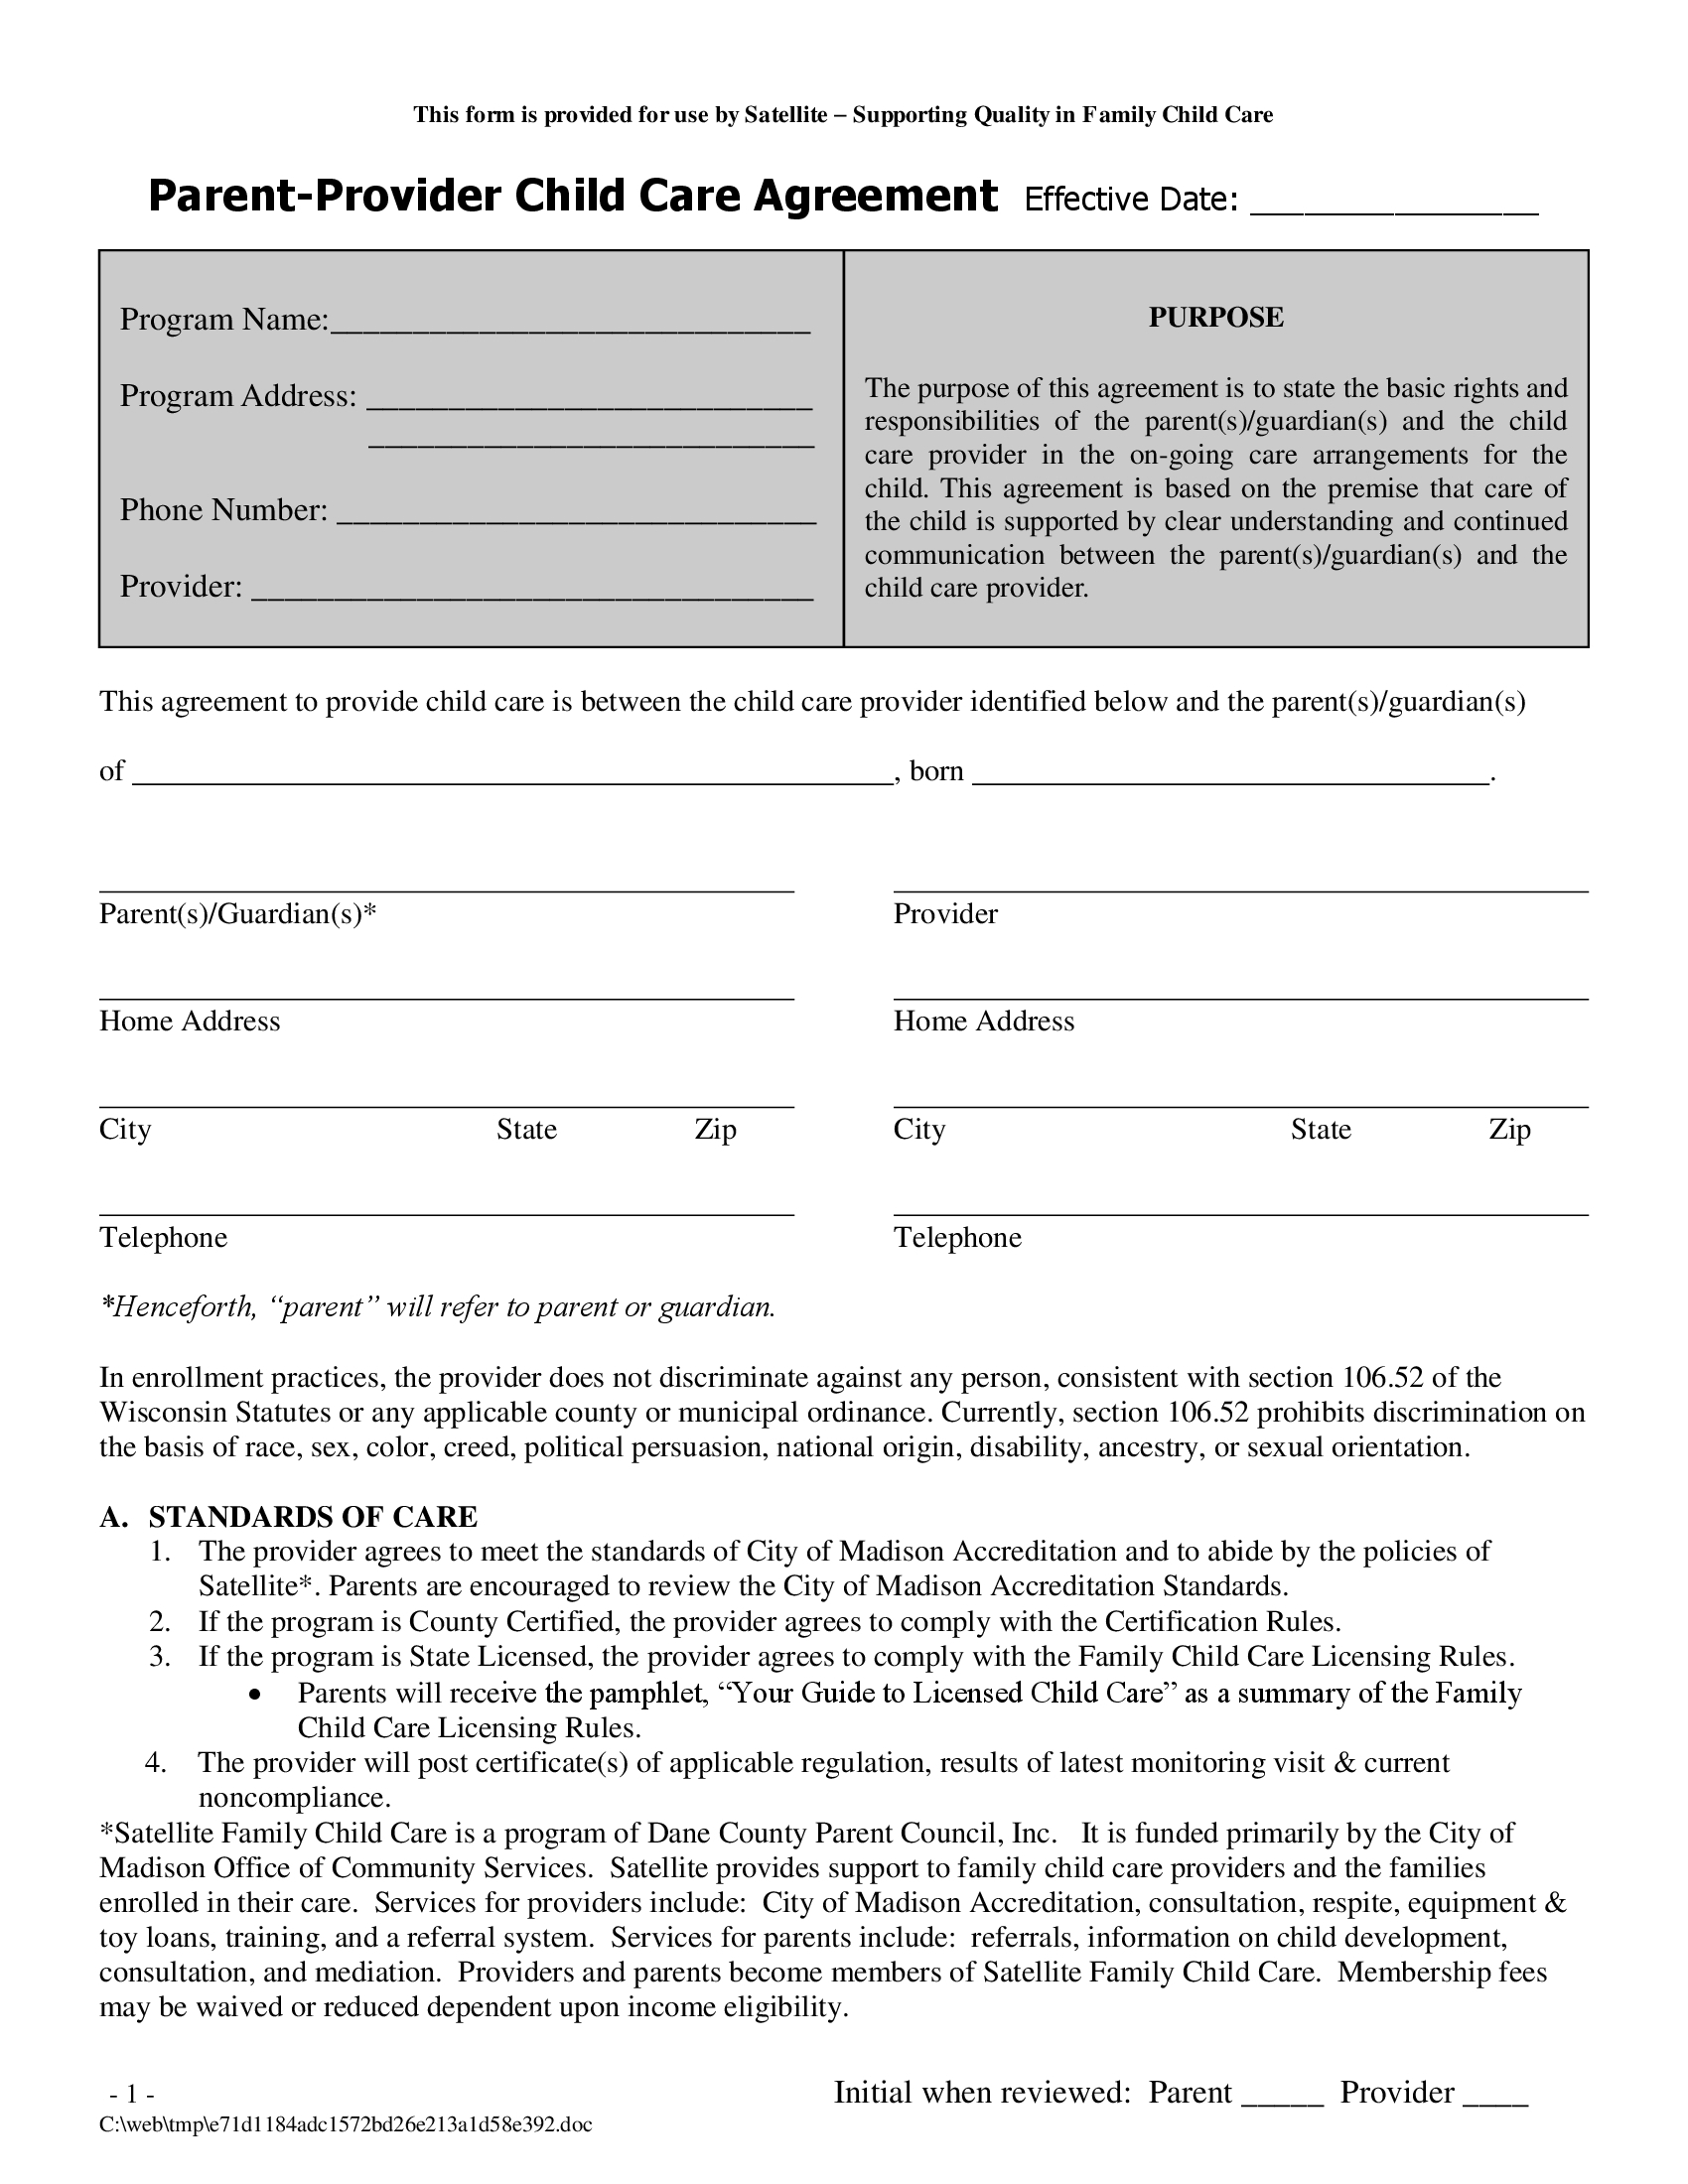 Parent Child Care Provider Agreement 11 Legal Agreement Forms Doc